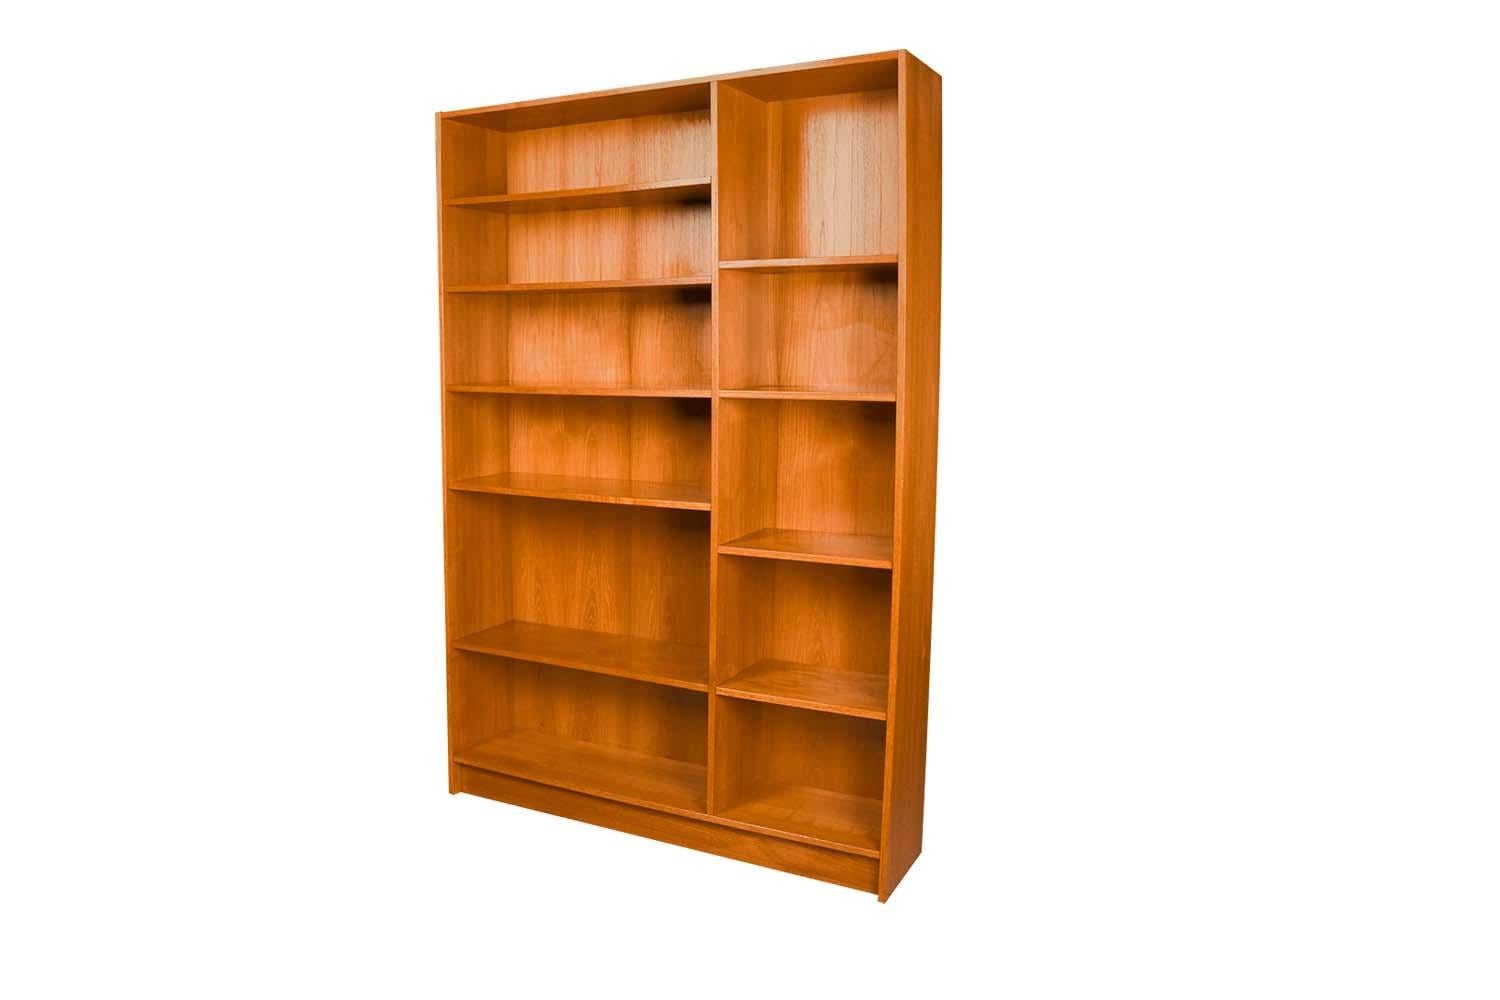 An exceptional teak tall Double bookcase made in Denmark by Domino Mobler. Gorgeous Mid-Century Modern Teak bookcase / tall bookshelf unit. Beautiful, minimalist, clean, straight lines. Features seven adjustable shelves providing ample storage